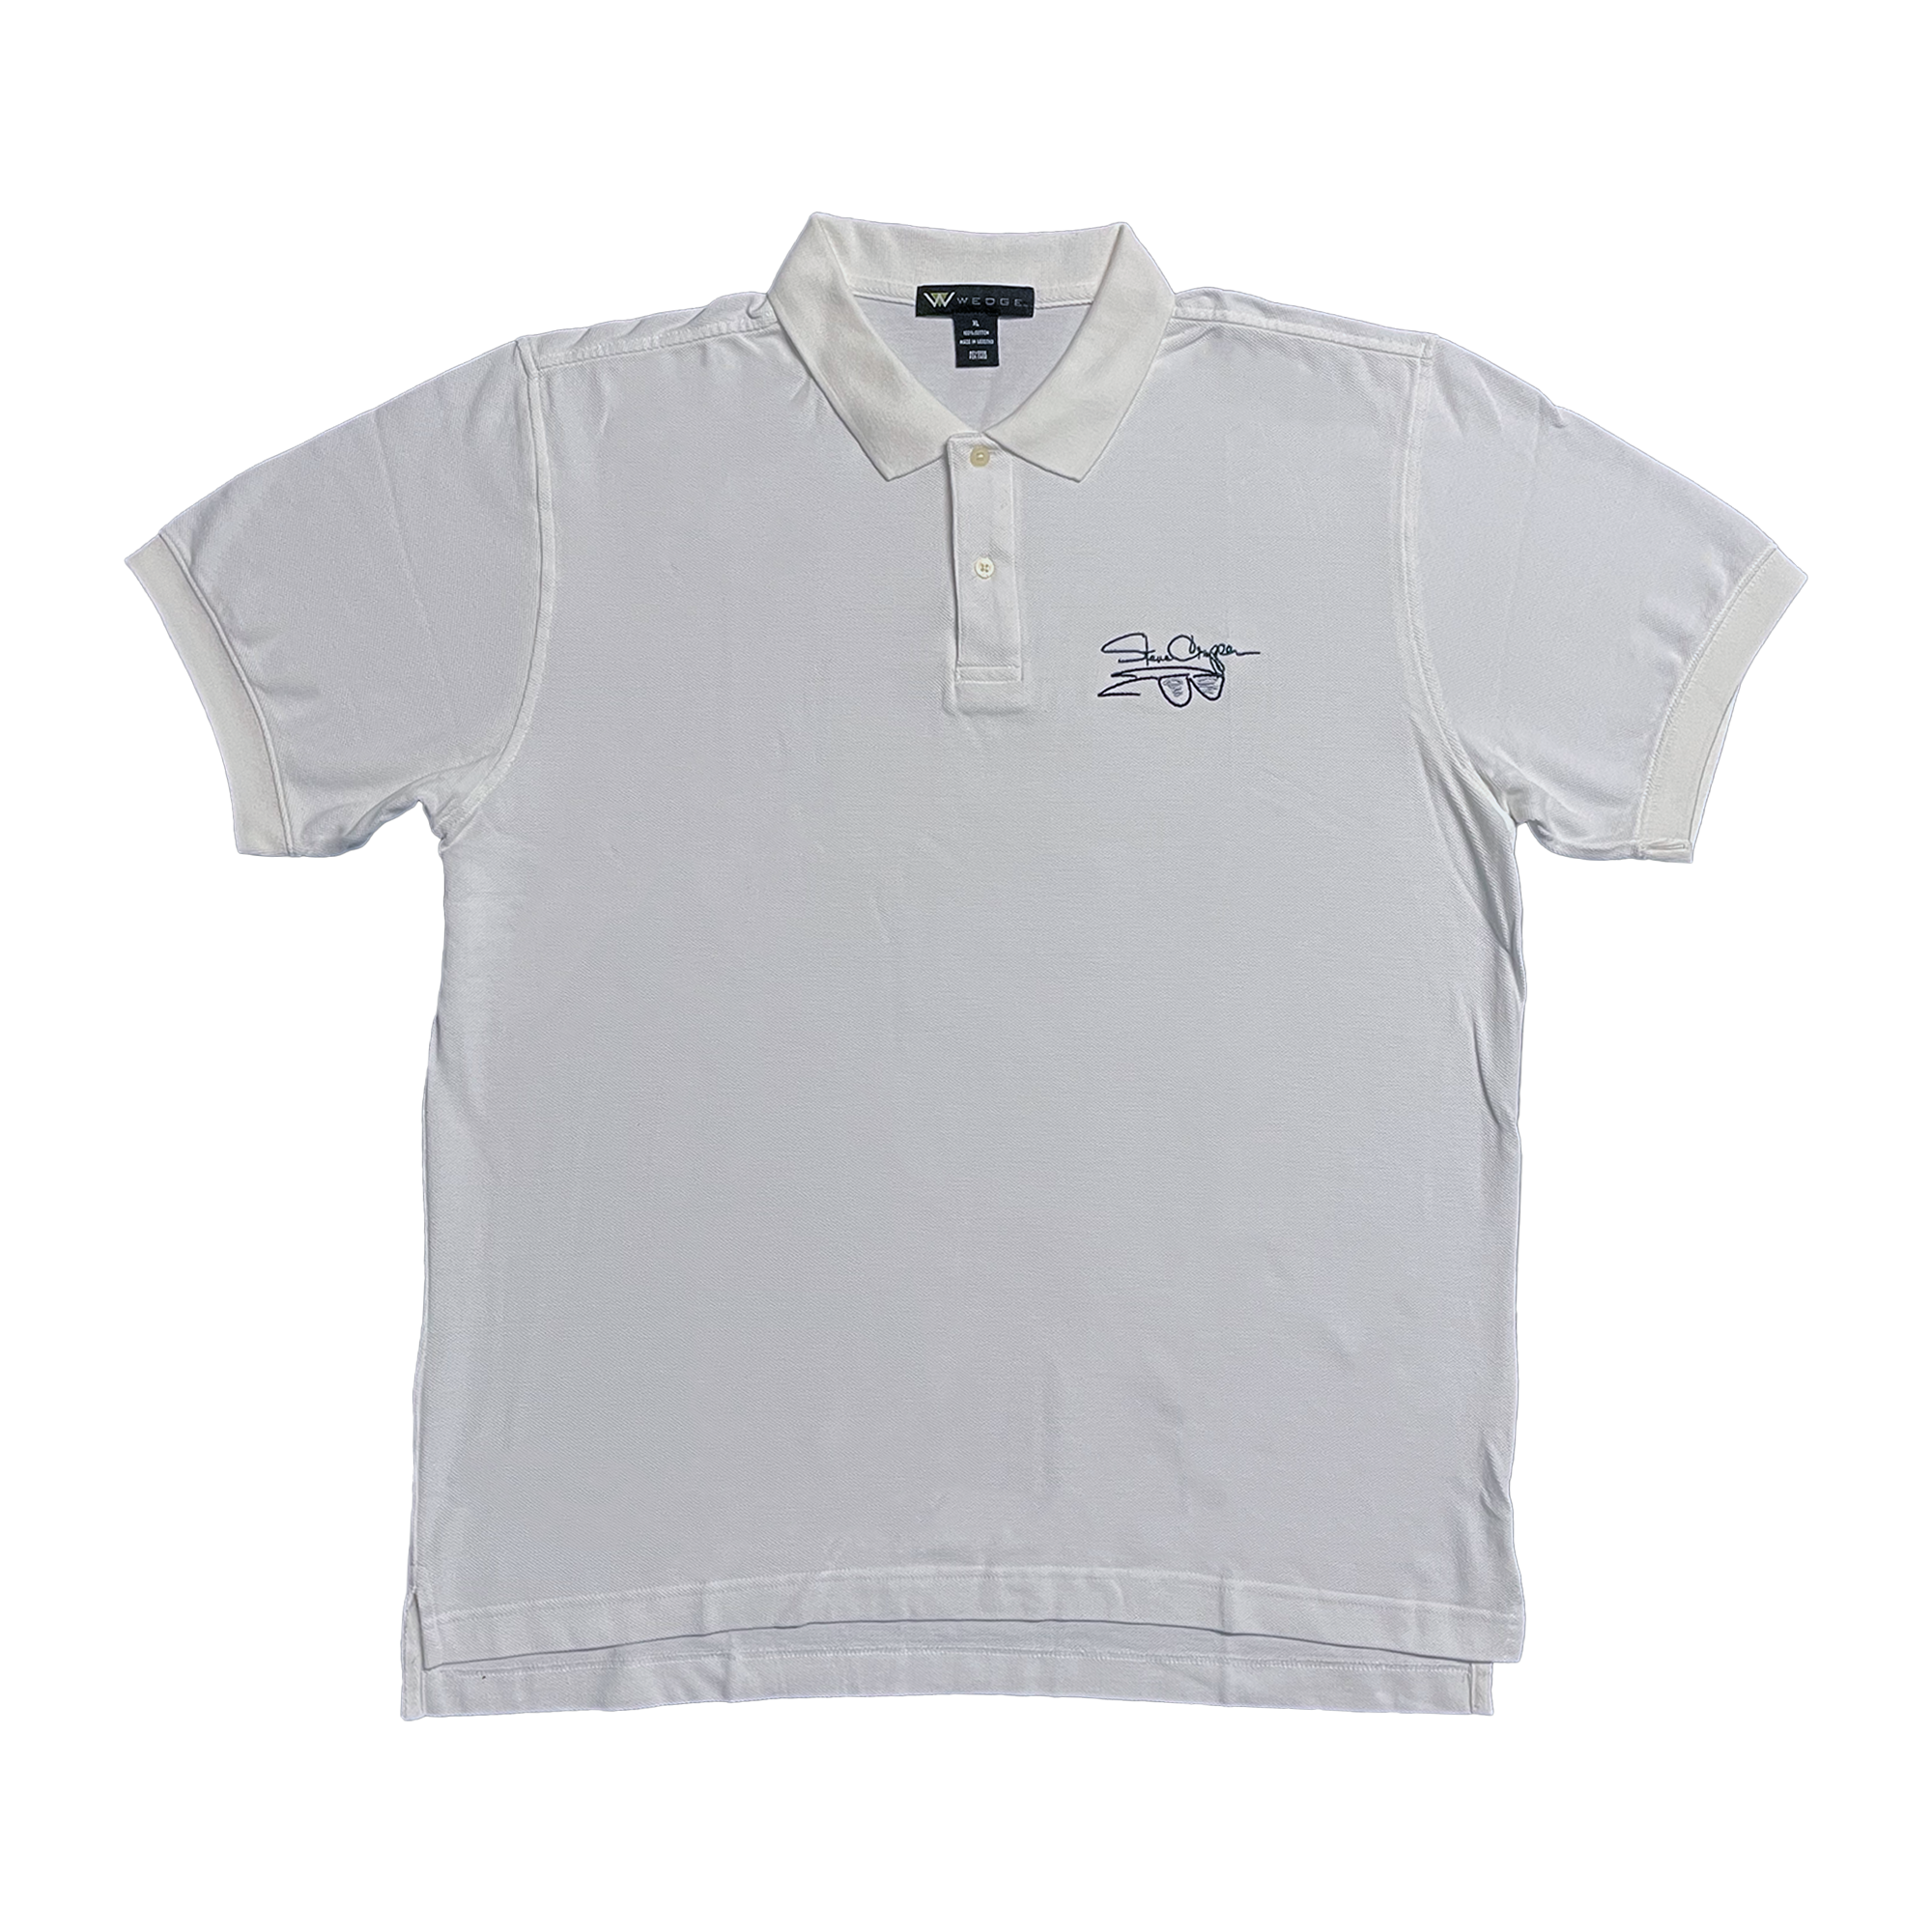 Steve Cropper - Embroidered White Polo Shirt